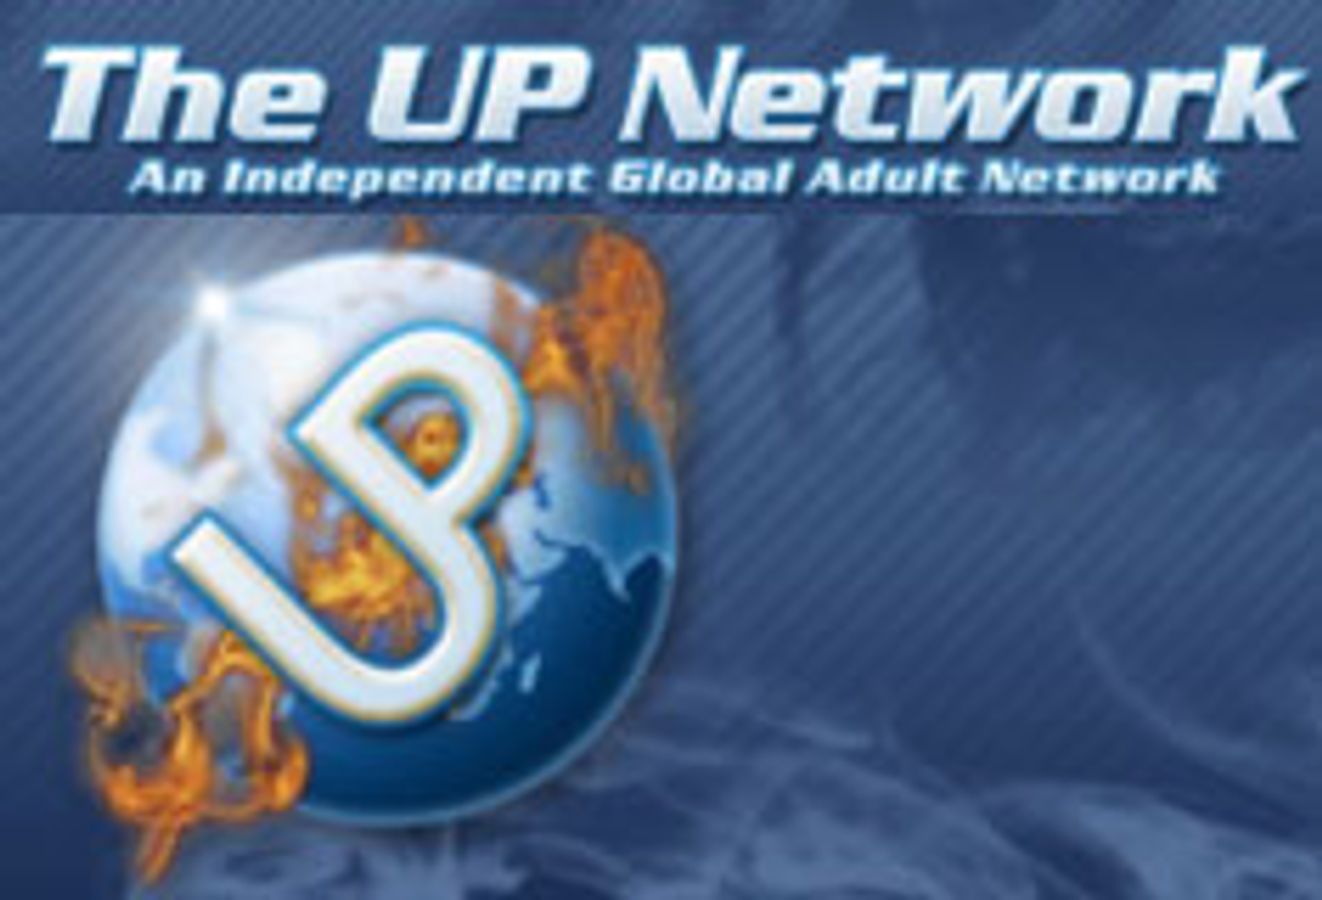 Up Network